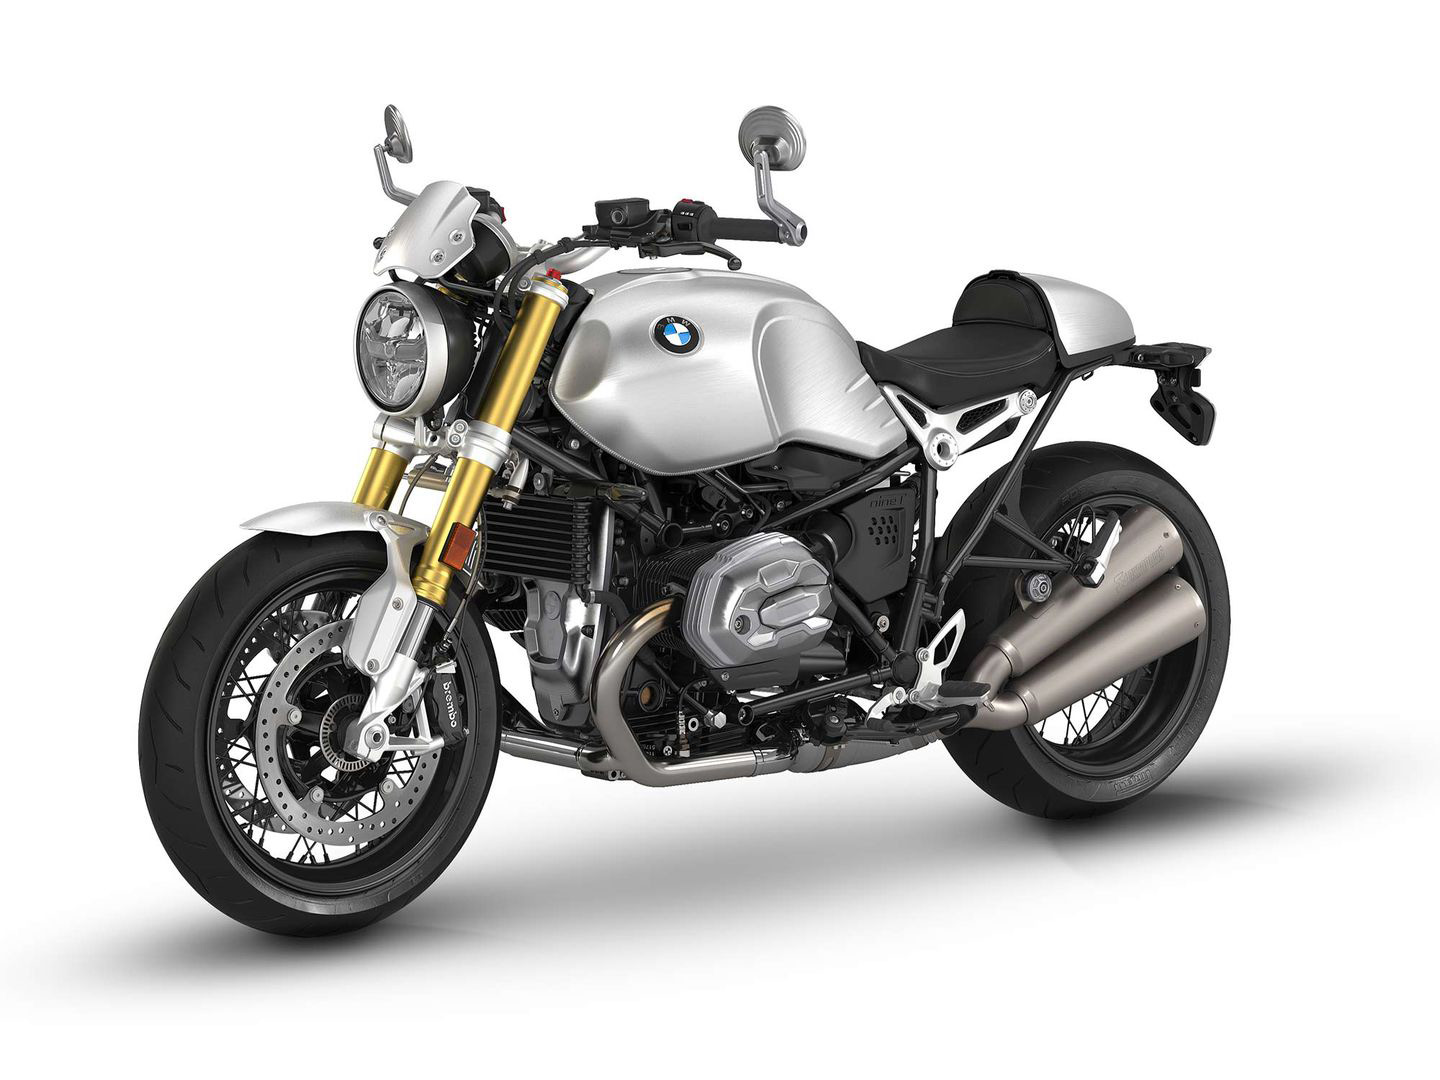 BMW Motorrad model revision measures for the model year 2022.